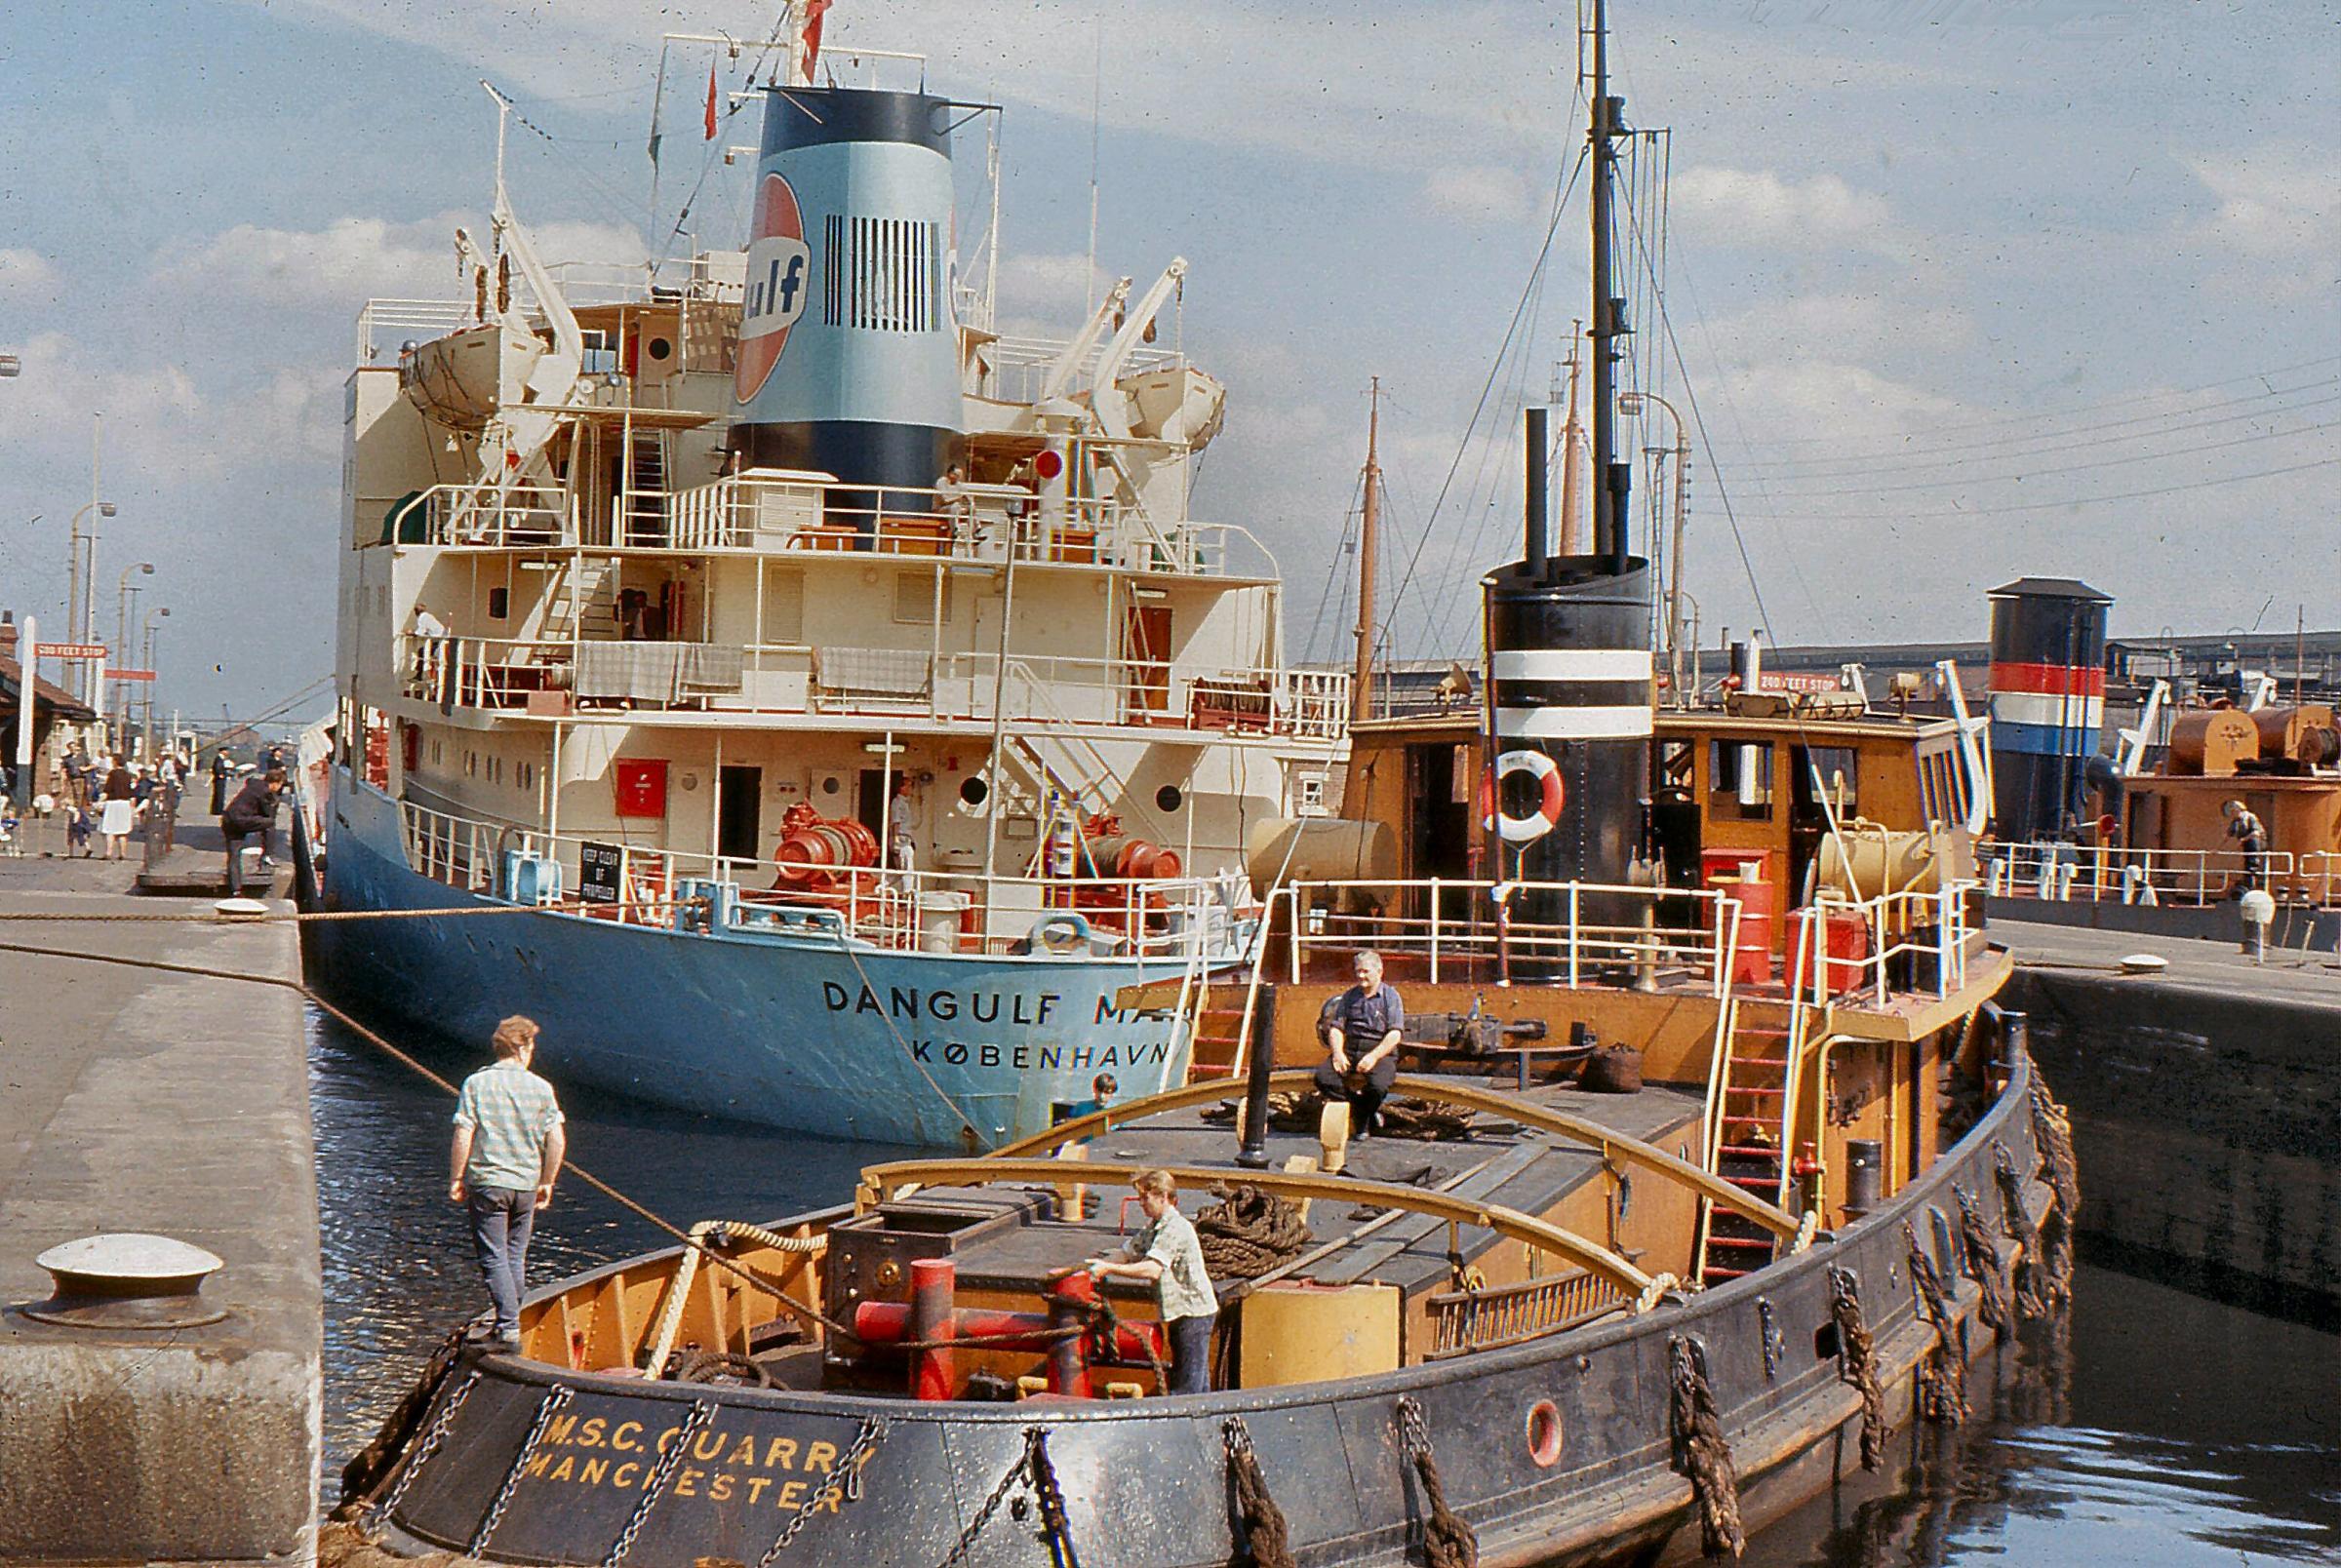 A ship from the Danish capital Copenhagen arrived in Warrington in August 1965 (Image: Eddie Whitham)